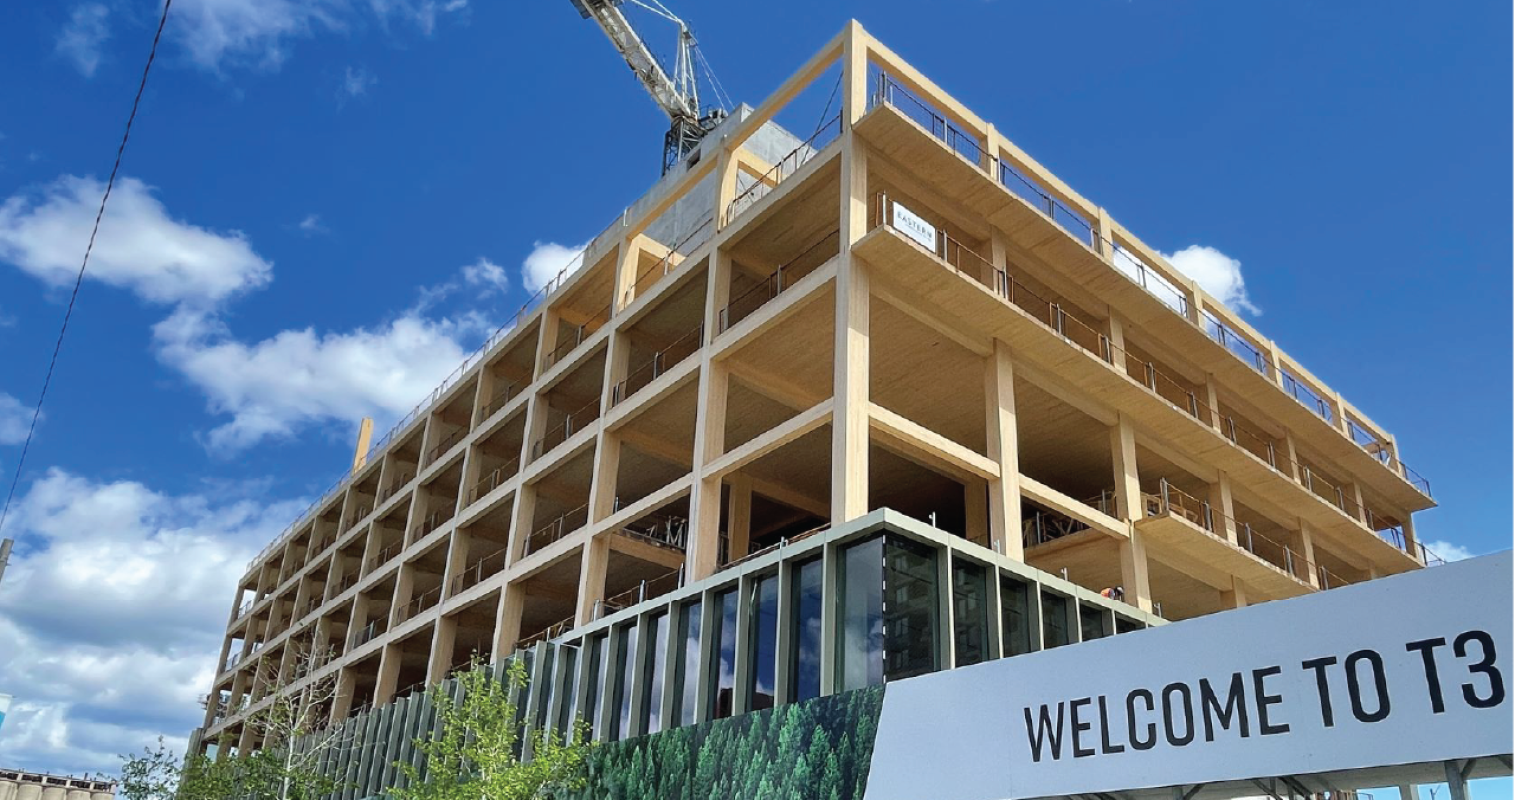 A mass-timber building under construction. Timber frame in foreground and blue sky in background.